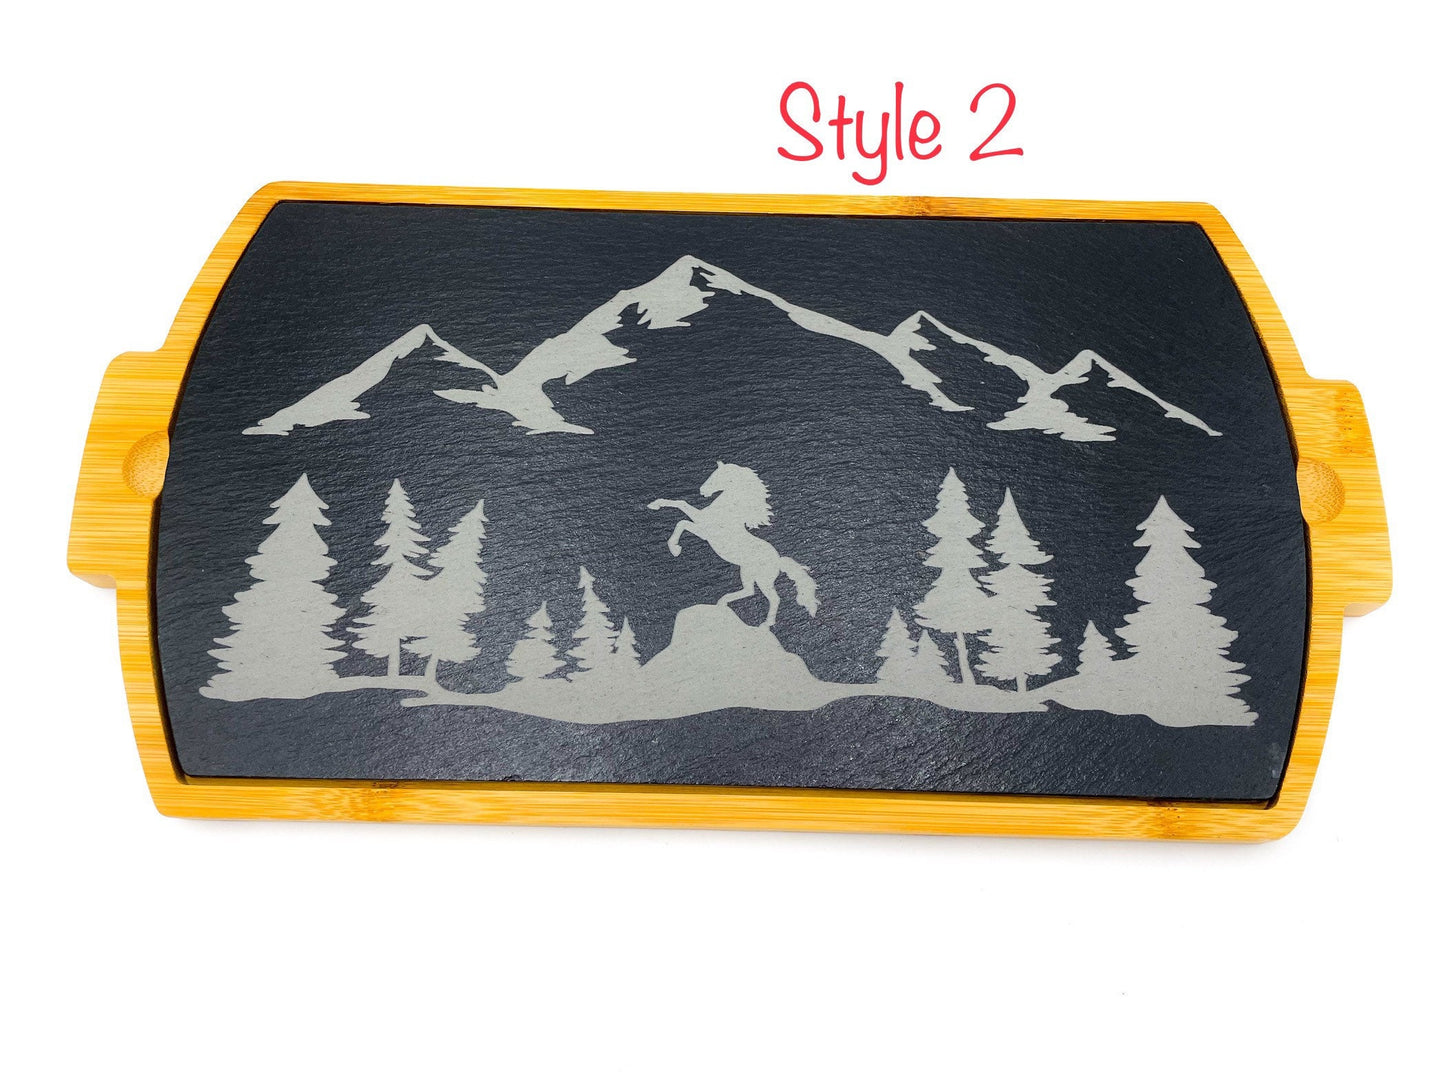 Engraved slate charcuterie board with horse, mountains, and trees. Bamboo on the outside edges. Slate serving tray